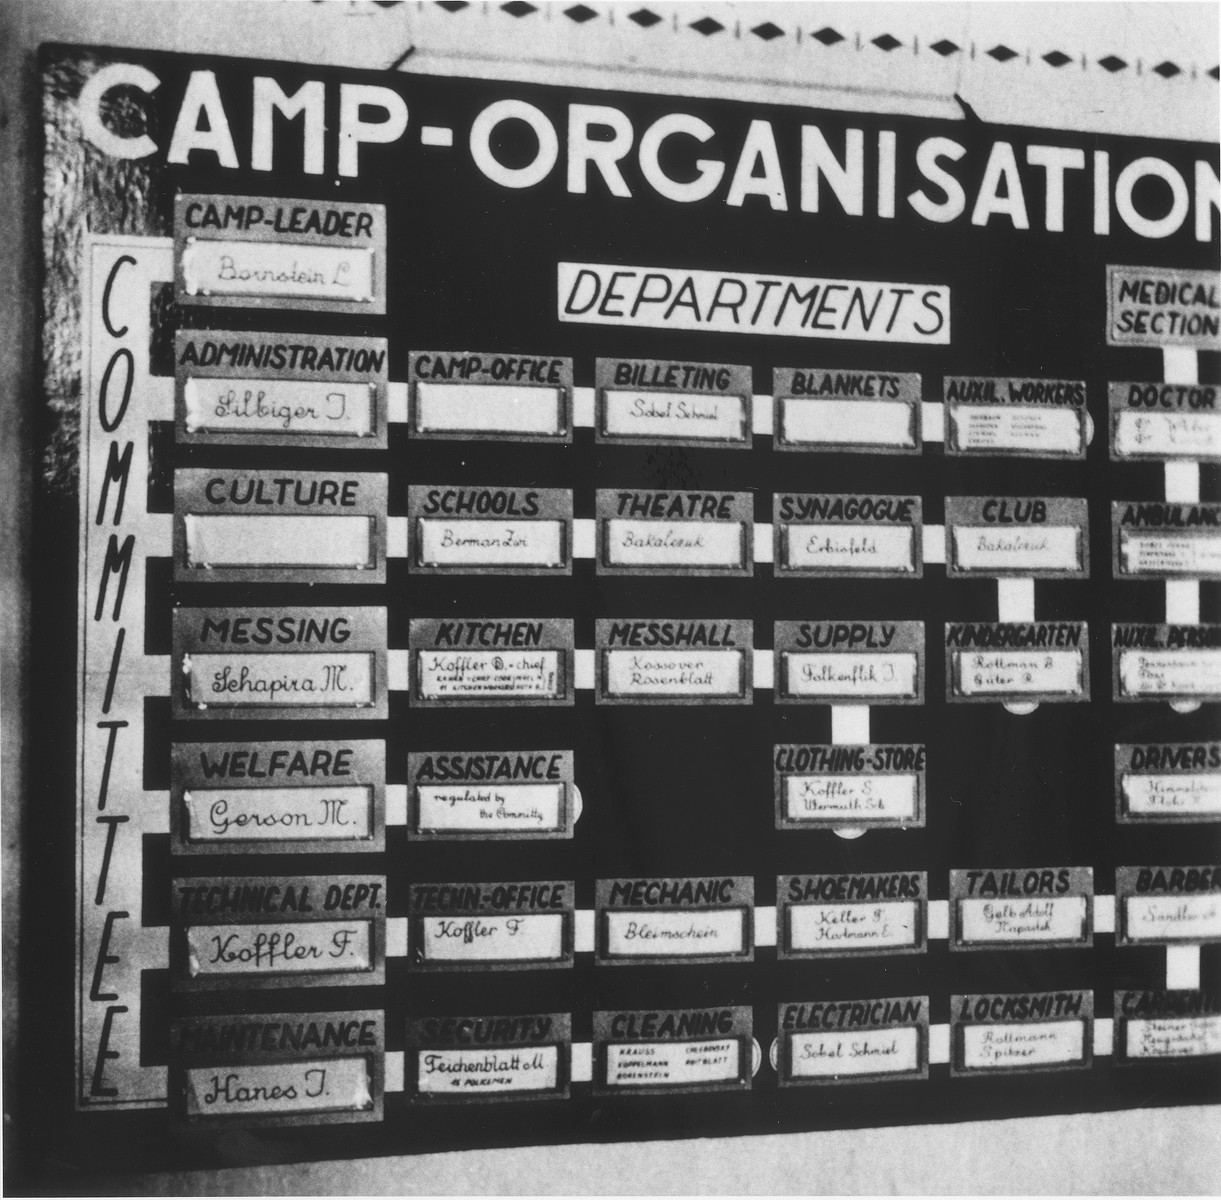 Organizational chart listing the departments and office holders of the Enns displaced persons camp.